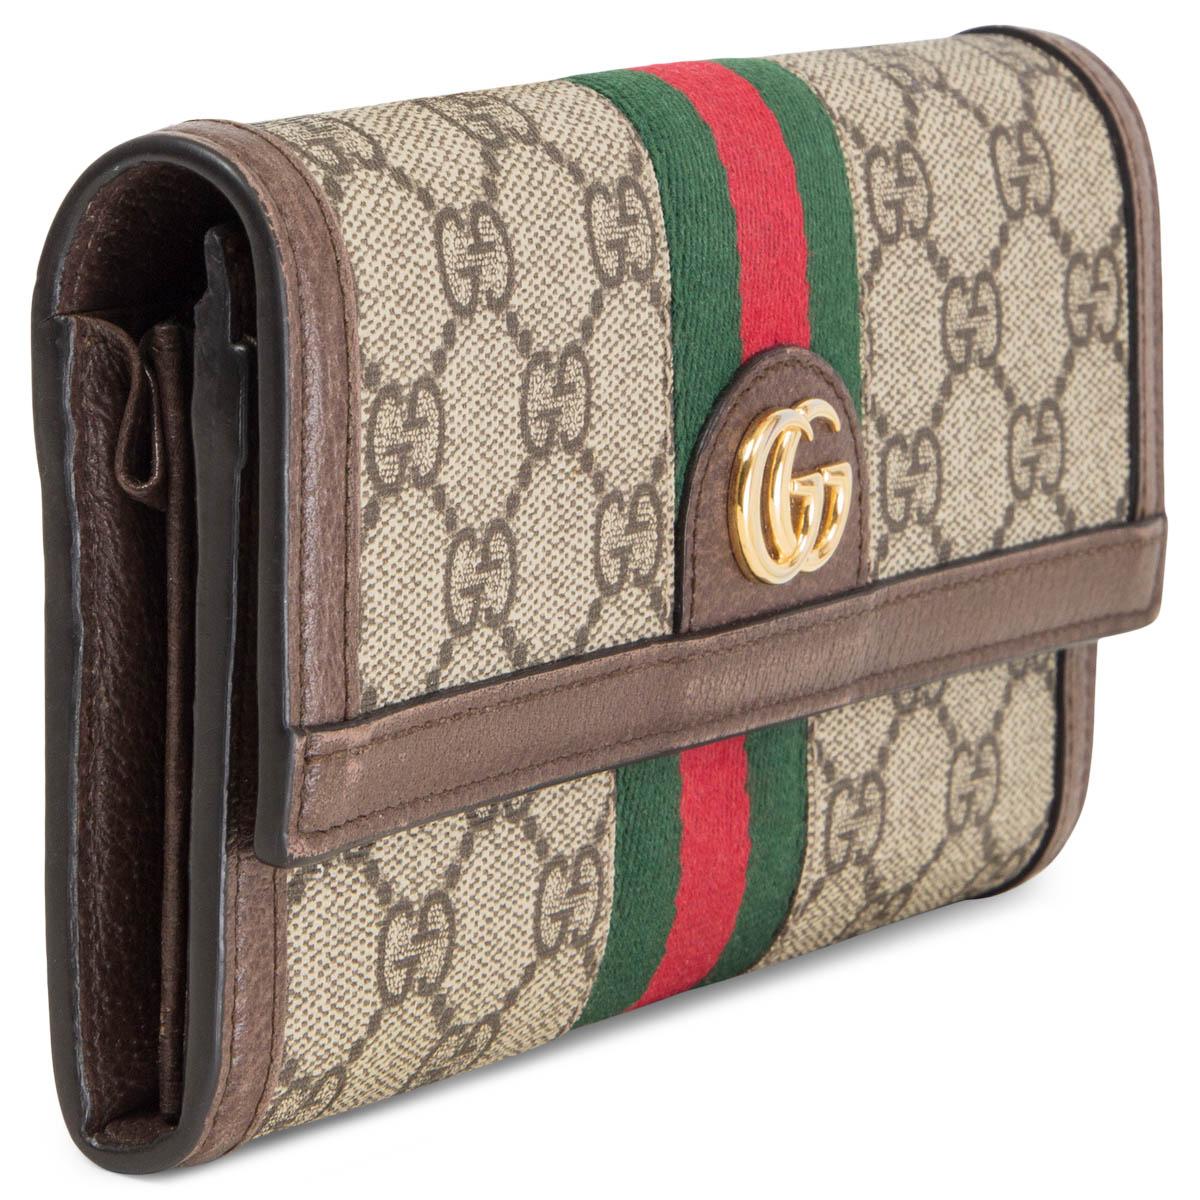 100% authentic Gucci GG Supreme Ophidia Continental Wallet combines the signature motif with the green/red Web stripe—a timeless pairing that pays homage to Gucci's roots and beige/ebony GG Supreme canvas with brown leather trim. Opens with a snap